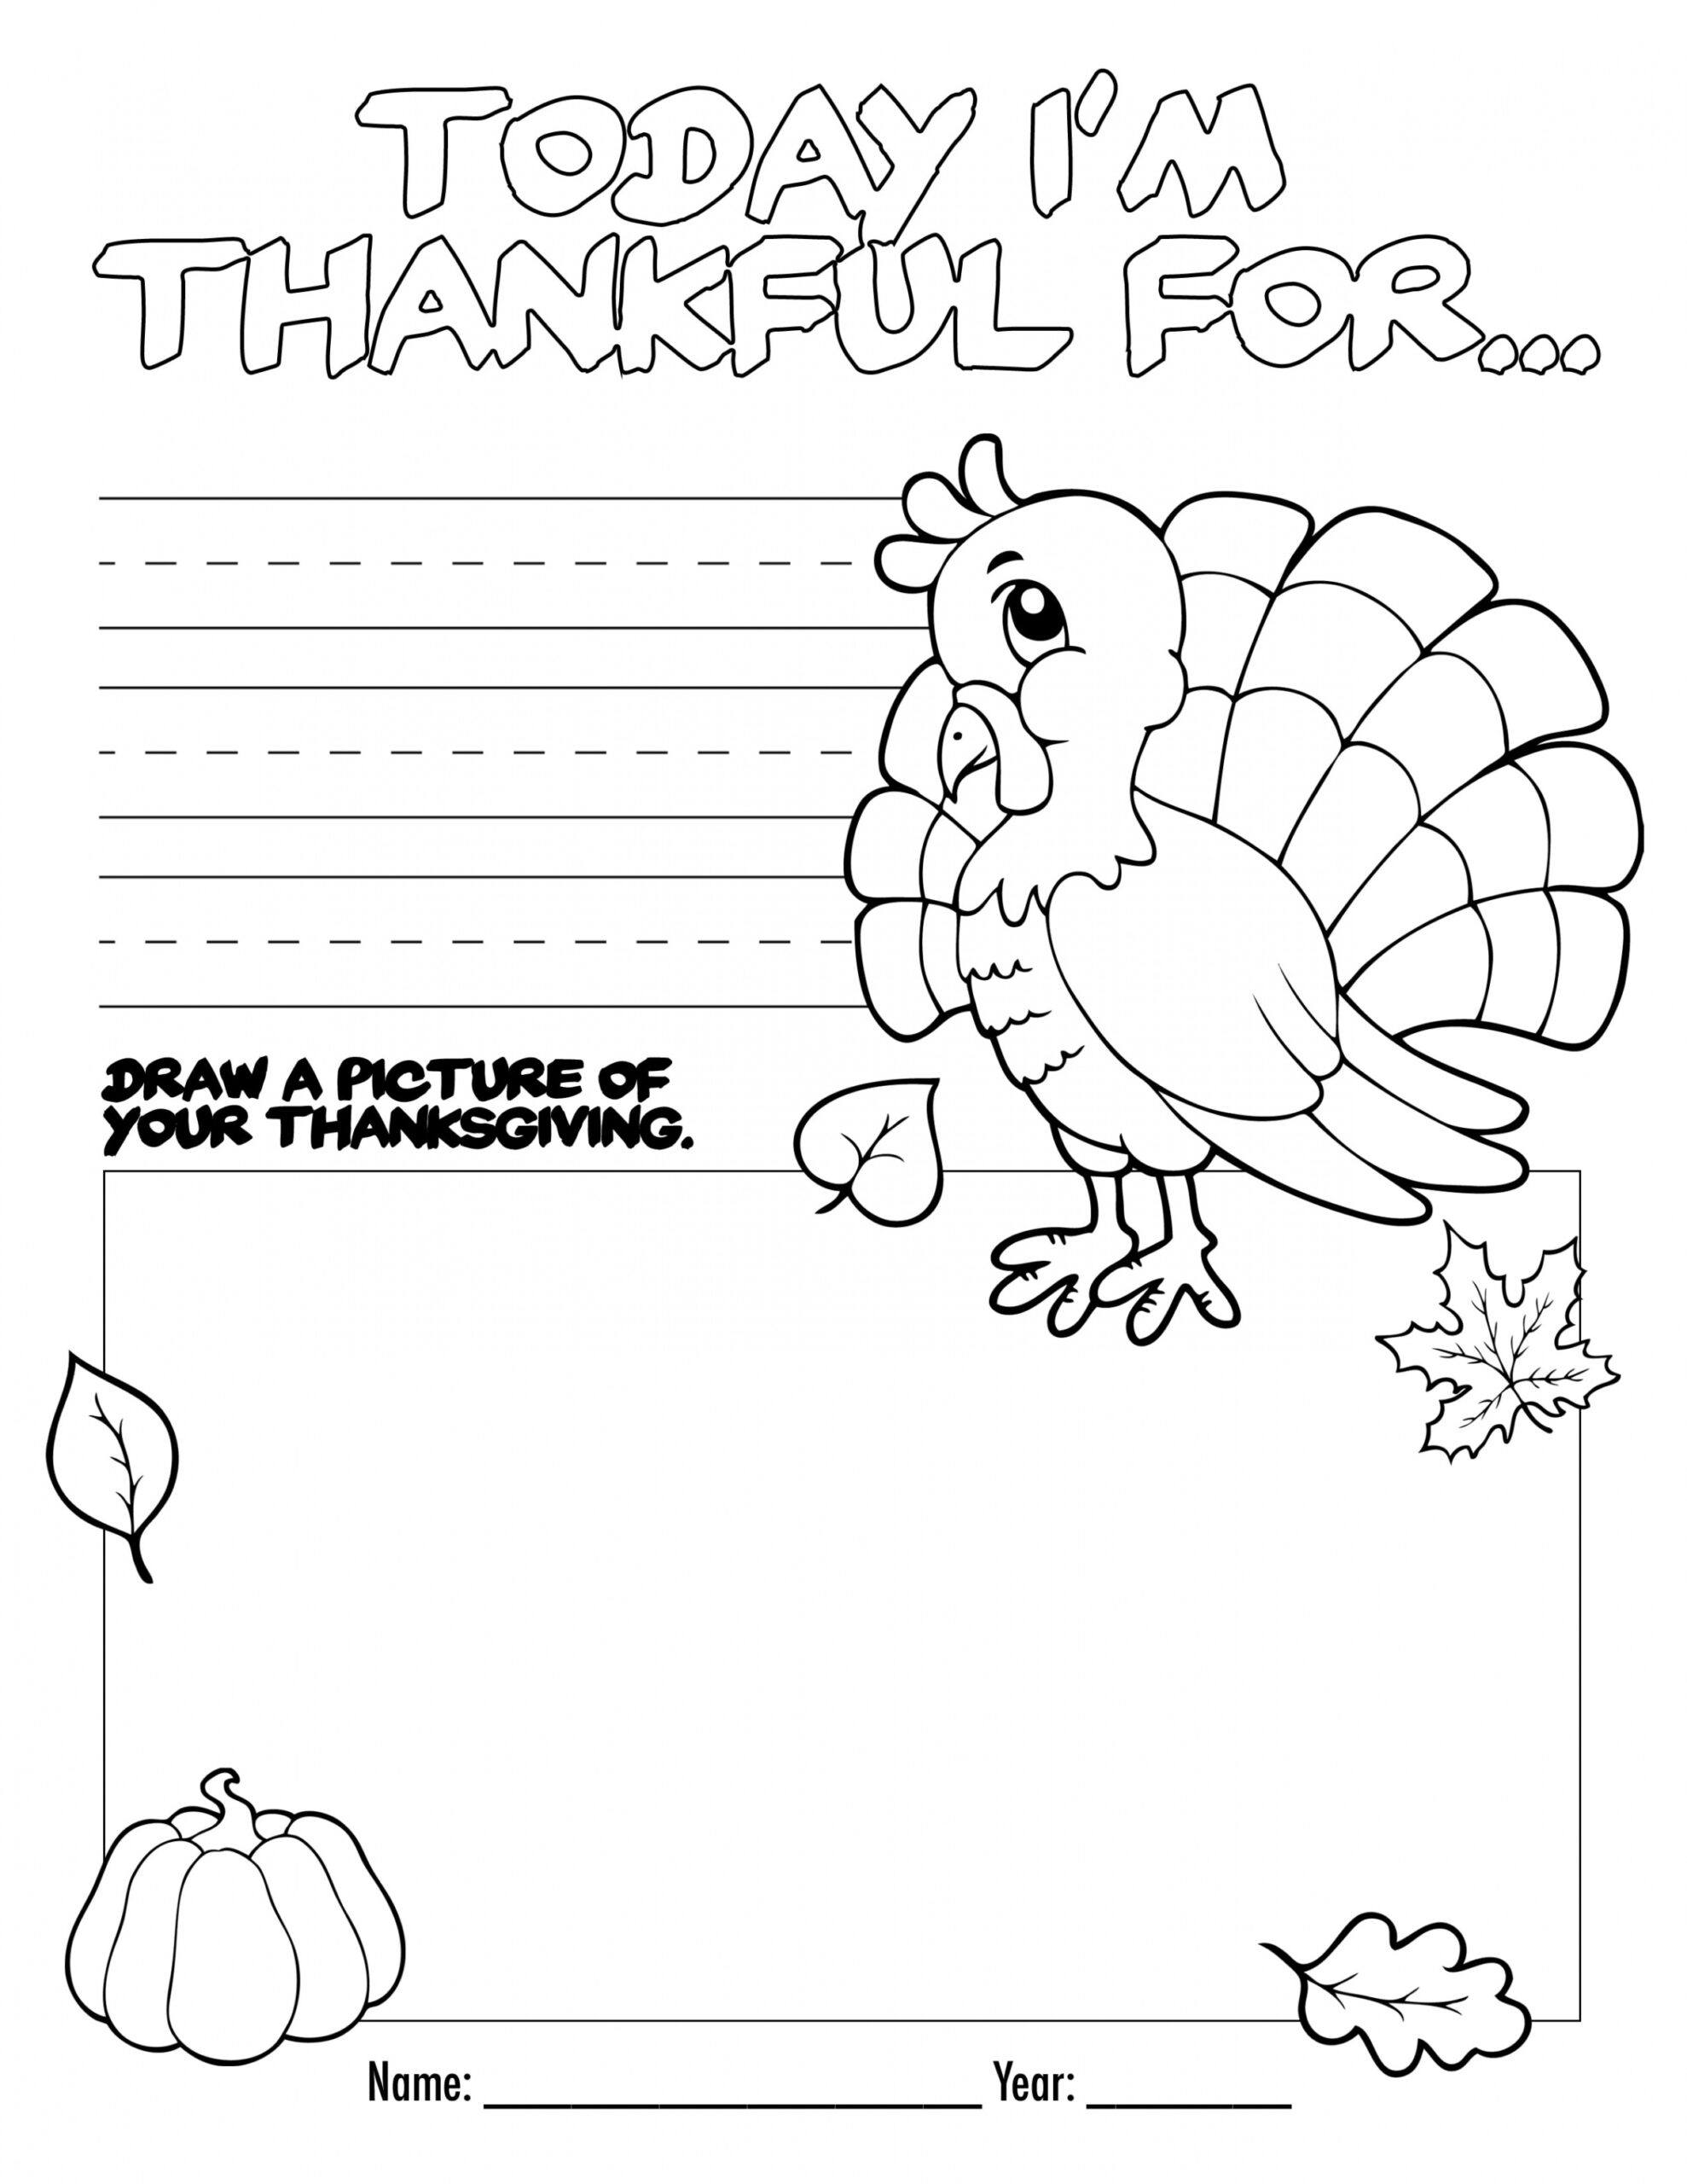 Thanksgiving Coloring Book Free Printable for the Kids!